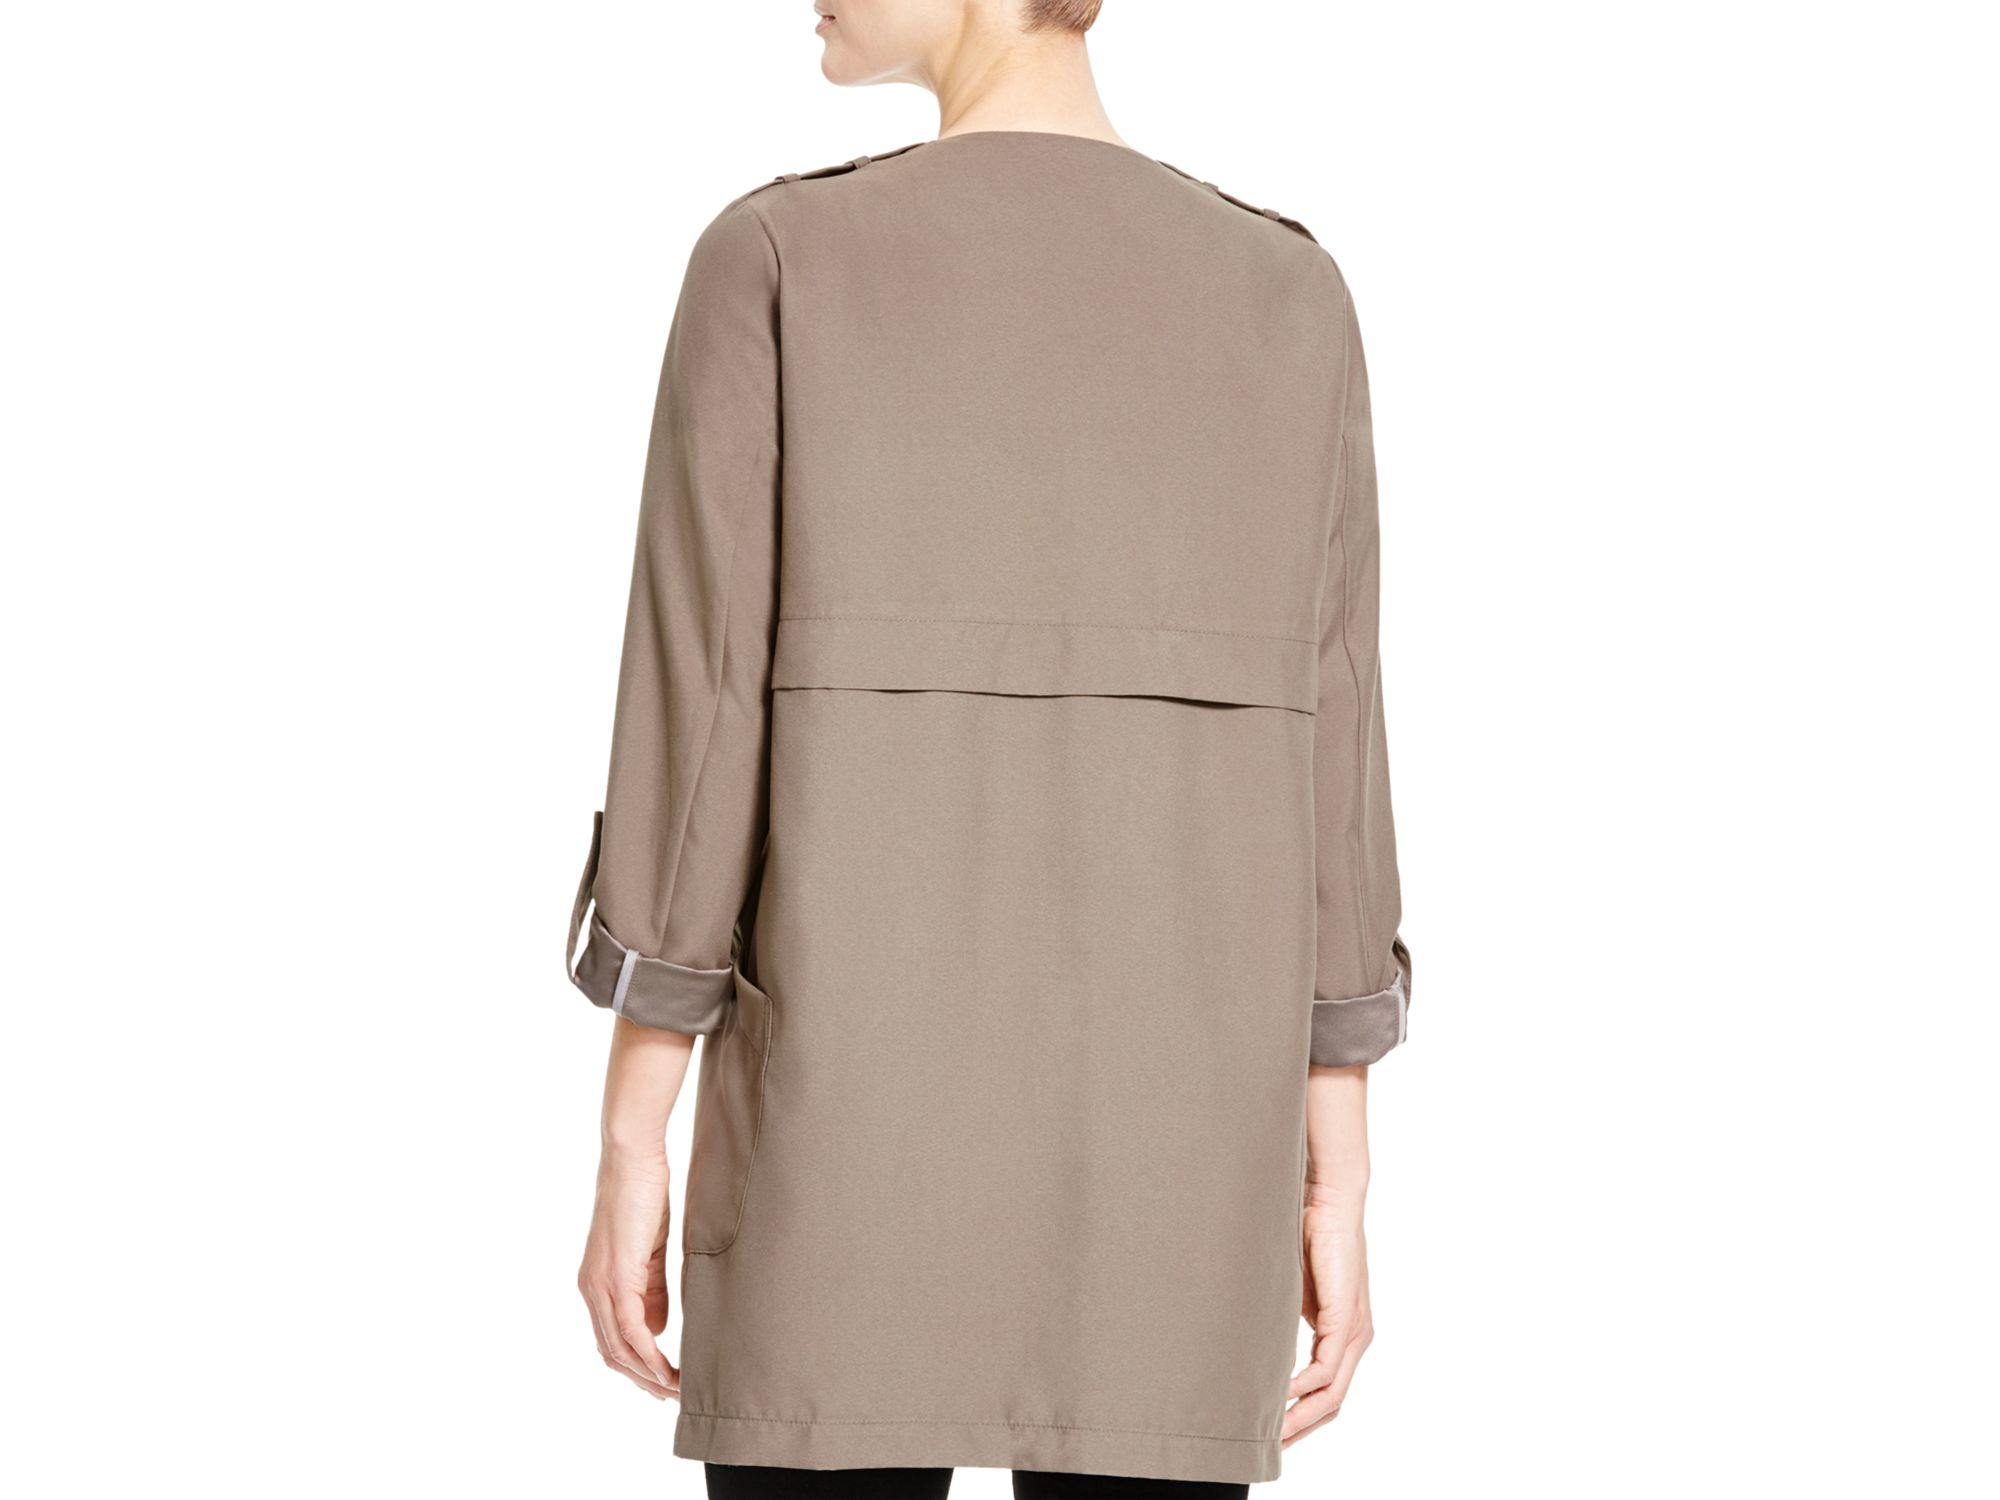 Vero Moda Synthetic Serena Draped Lightweight Jacket in Brown - Lyst